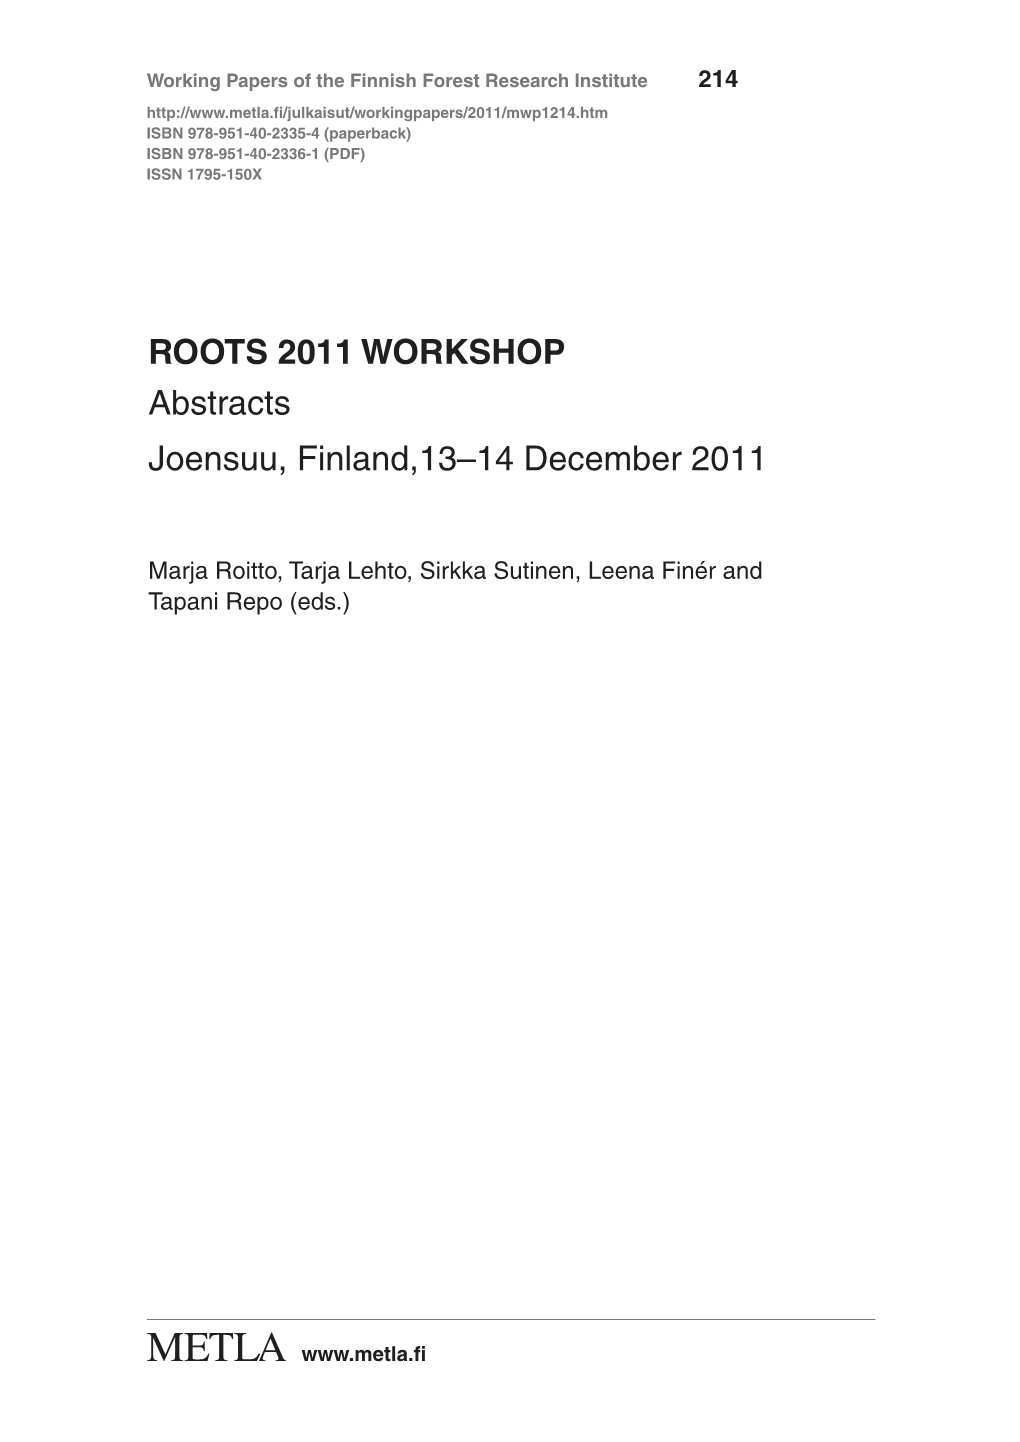 ROOTS 2011 WORKSHOP, Abstracts, Joensuu, Finland,13–14 December 2011 Year Pages ISBN ISSN